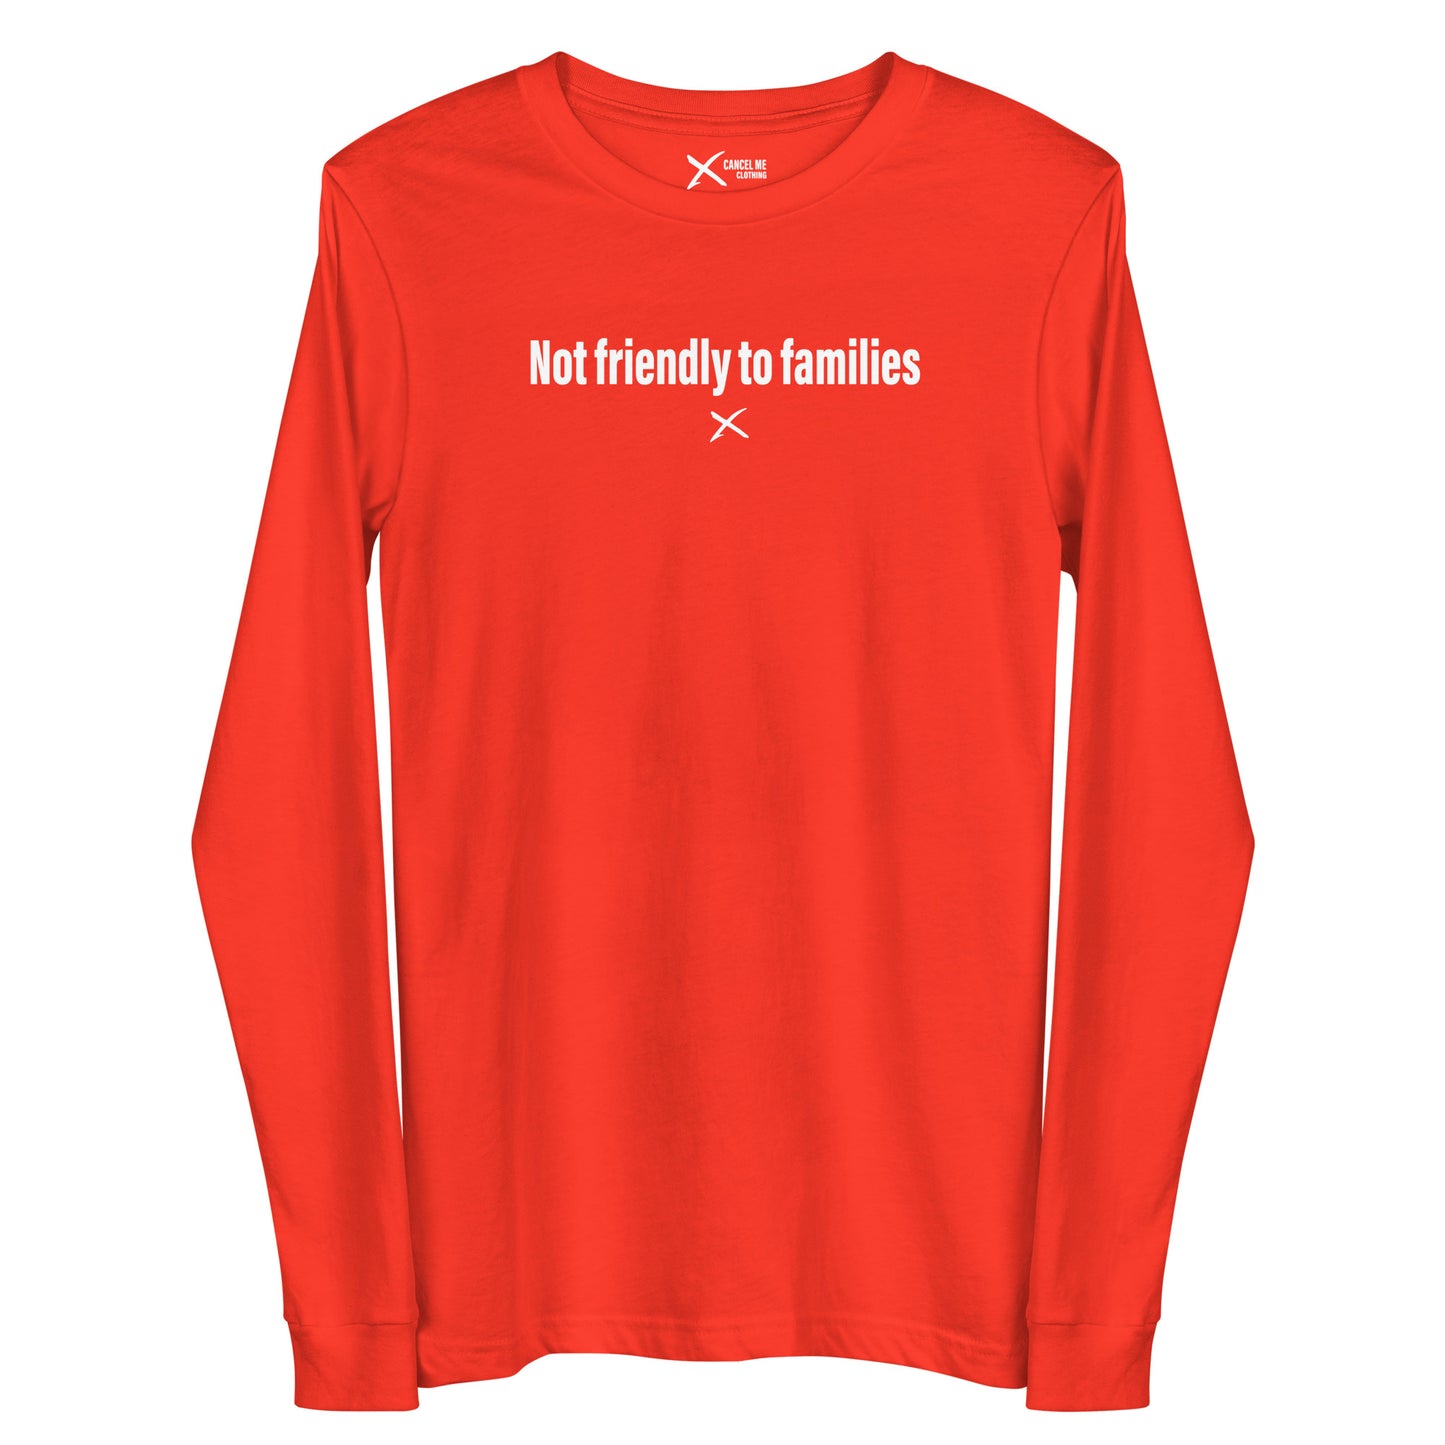 Not friendly to families - Longsleeve